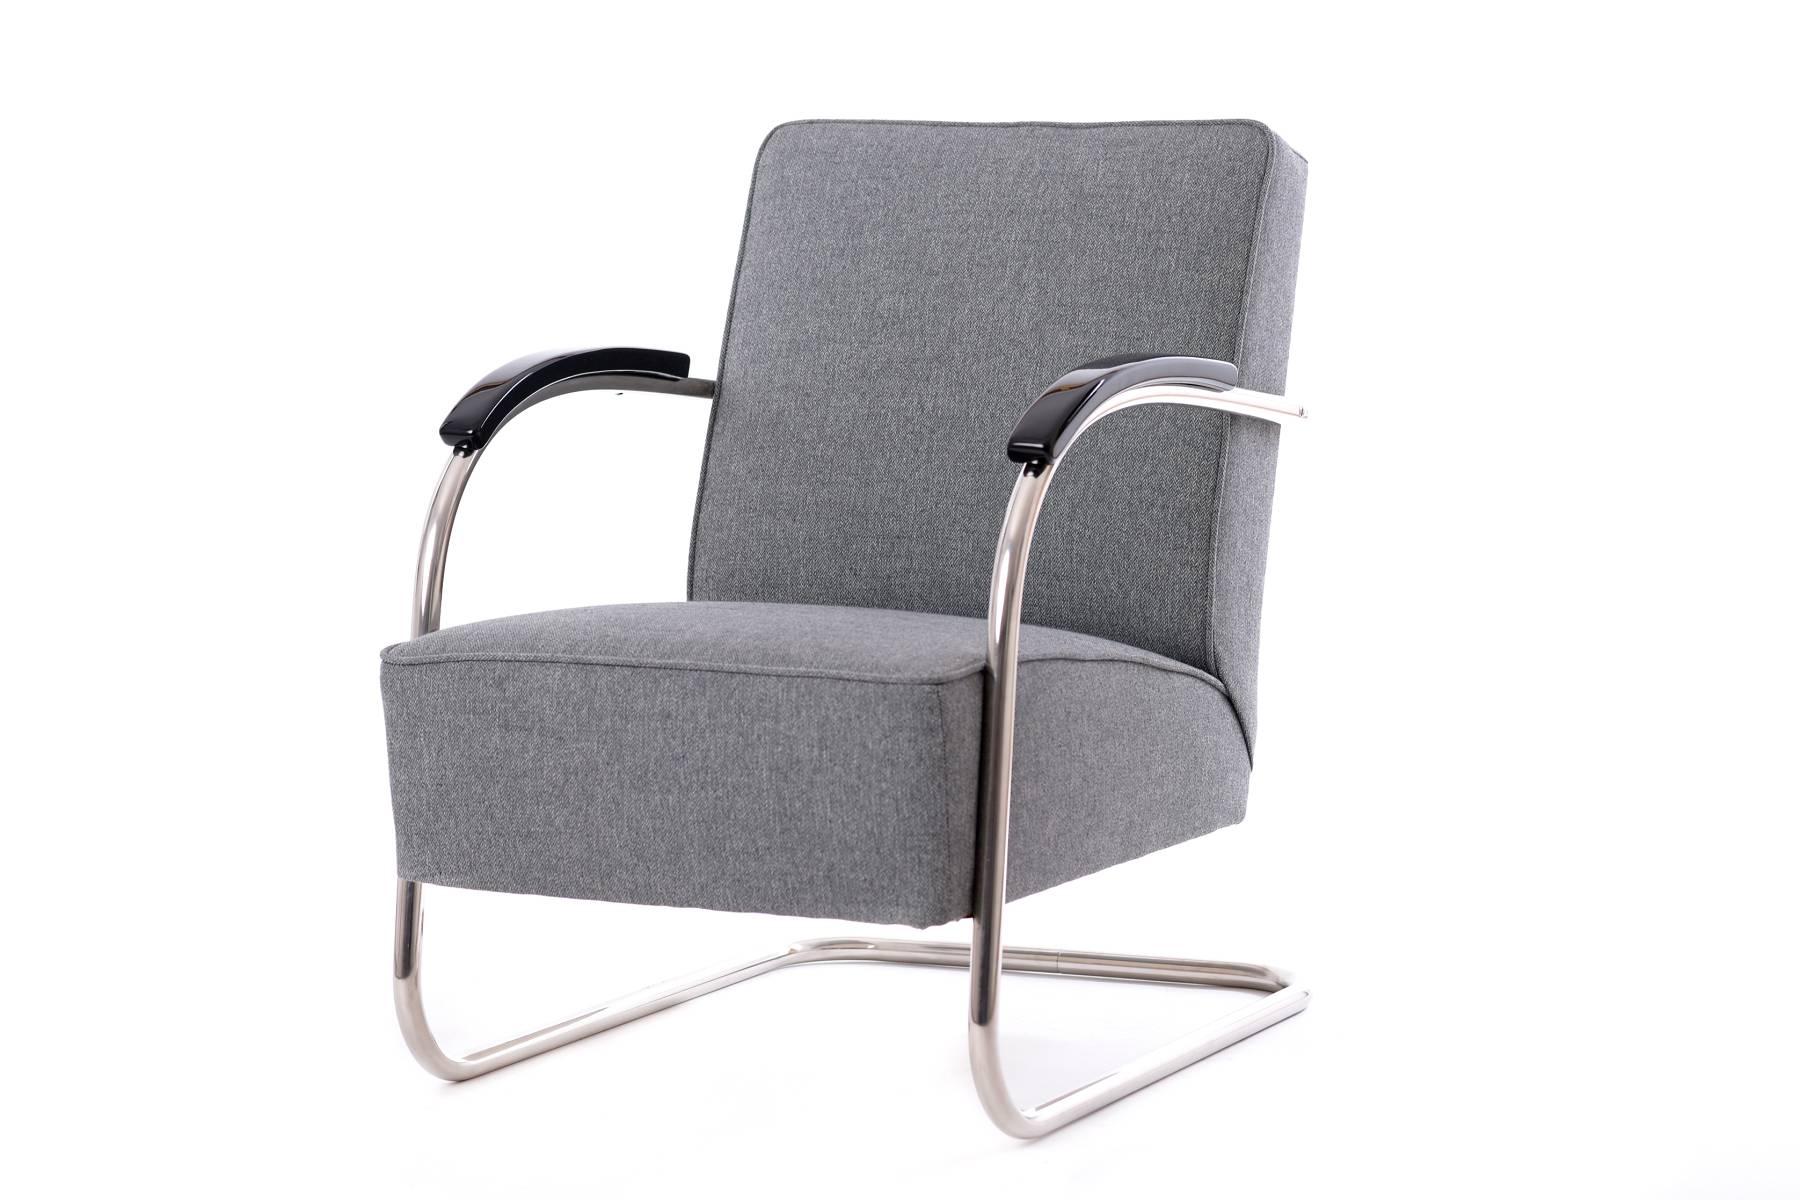 This free-swinging chair with a structure made of nickel-plated steel tubing was designed by the company Mücke & Melder in Frystat, Czechoslovakia during the 1930s.